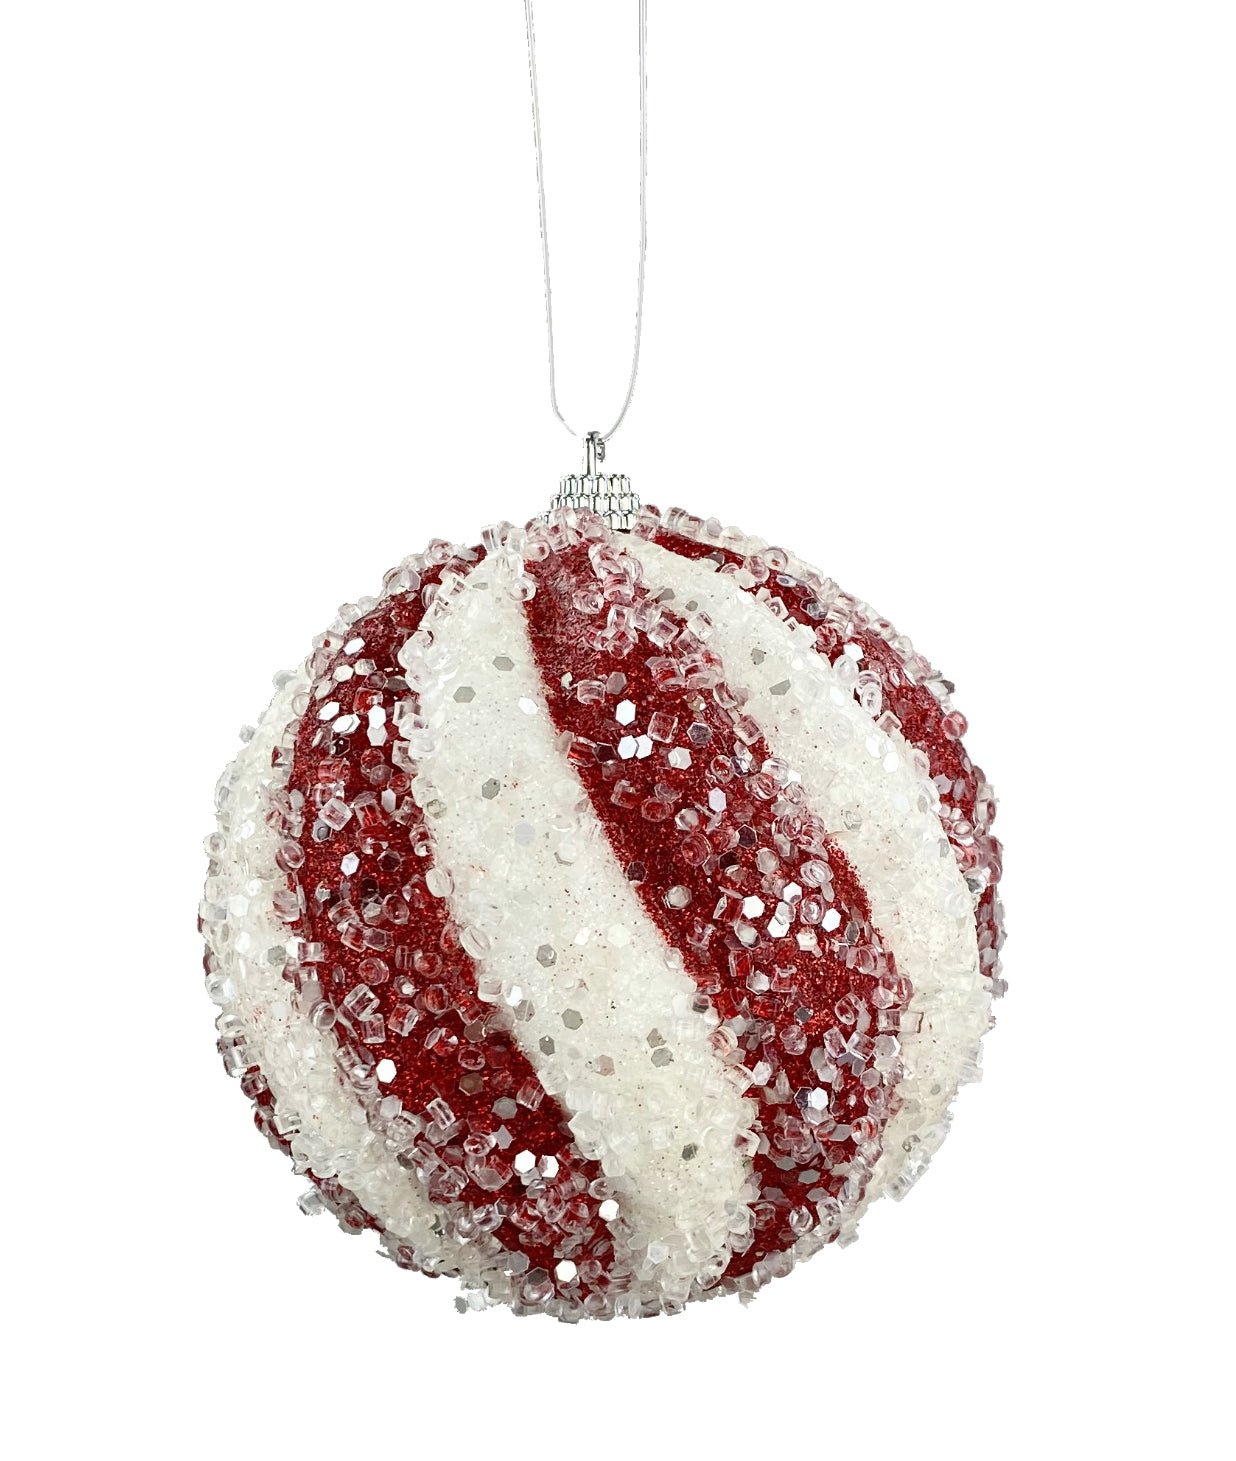 Red and white icy ball ornaments - Greenery MarketOrnaments85237RDWT